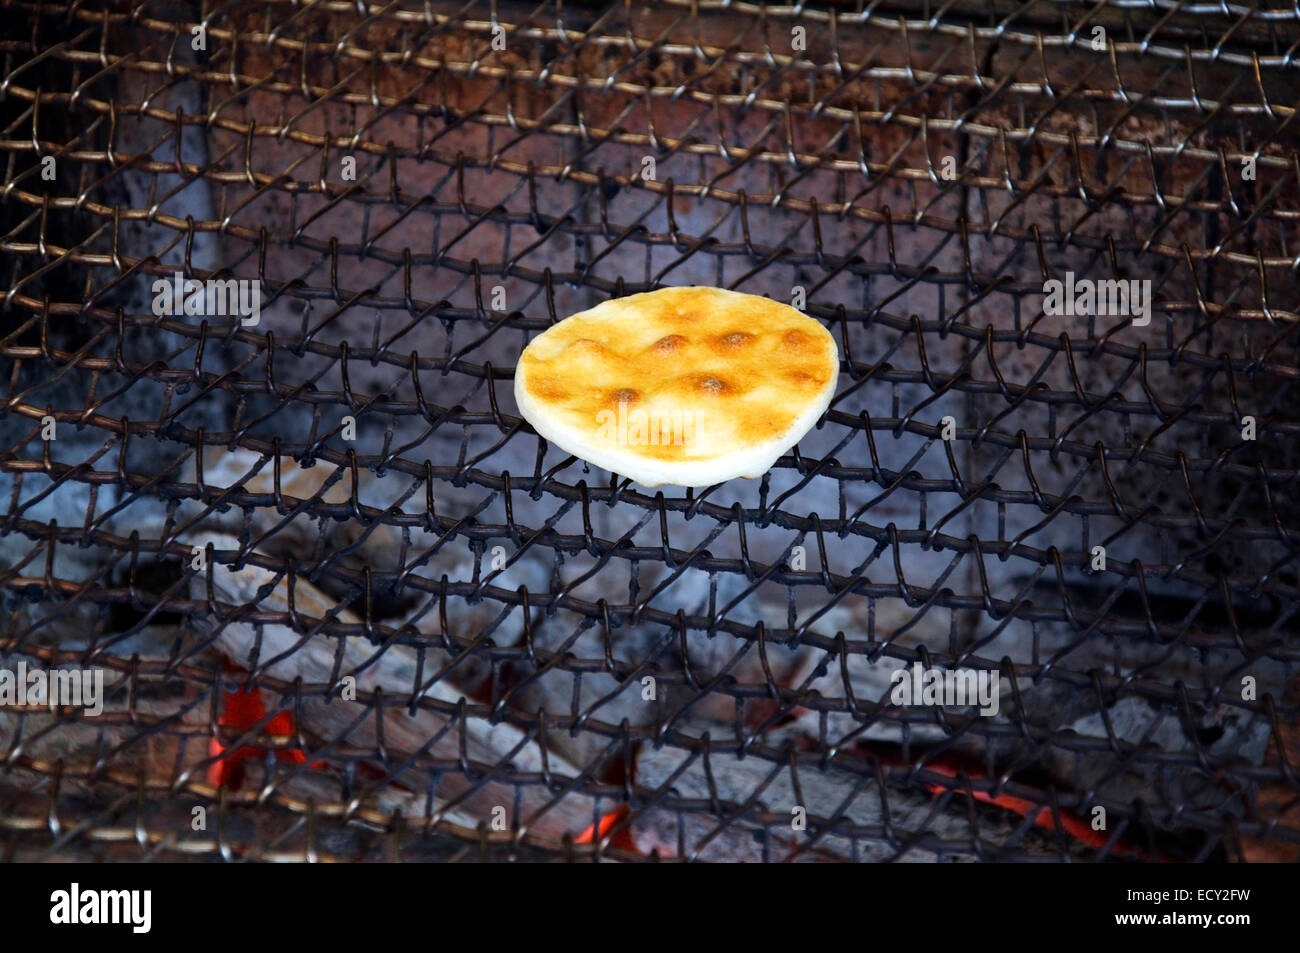 Single Japanese senbei being grilled over charcoal Stock Photo